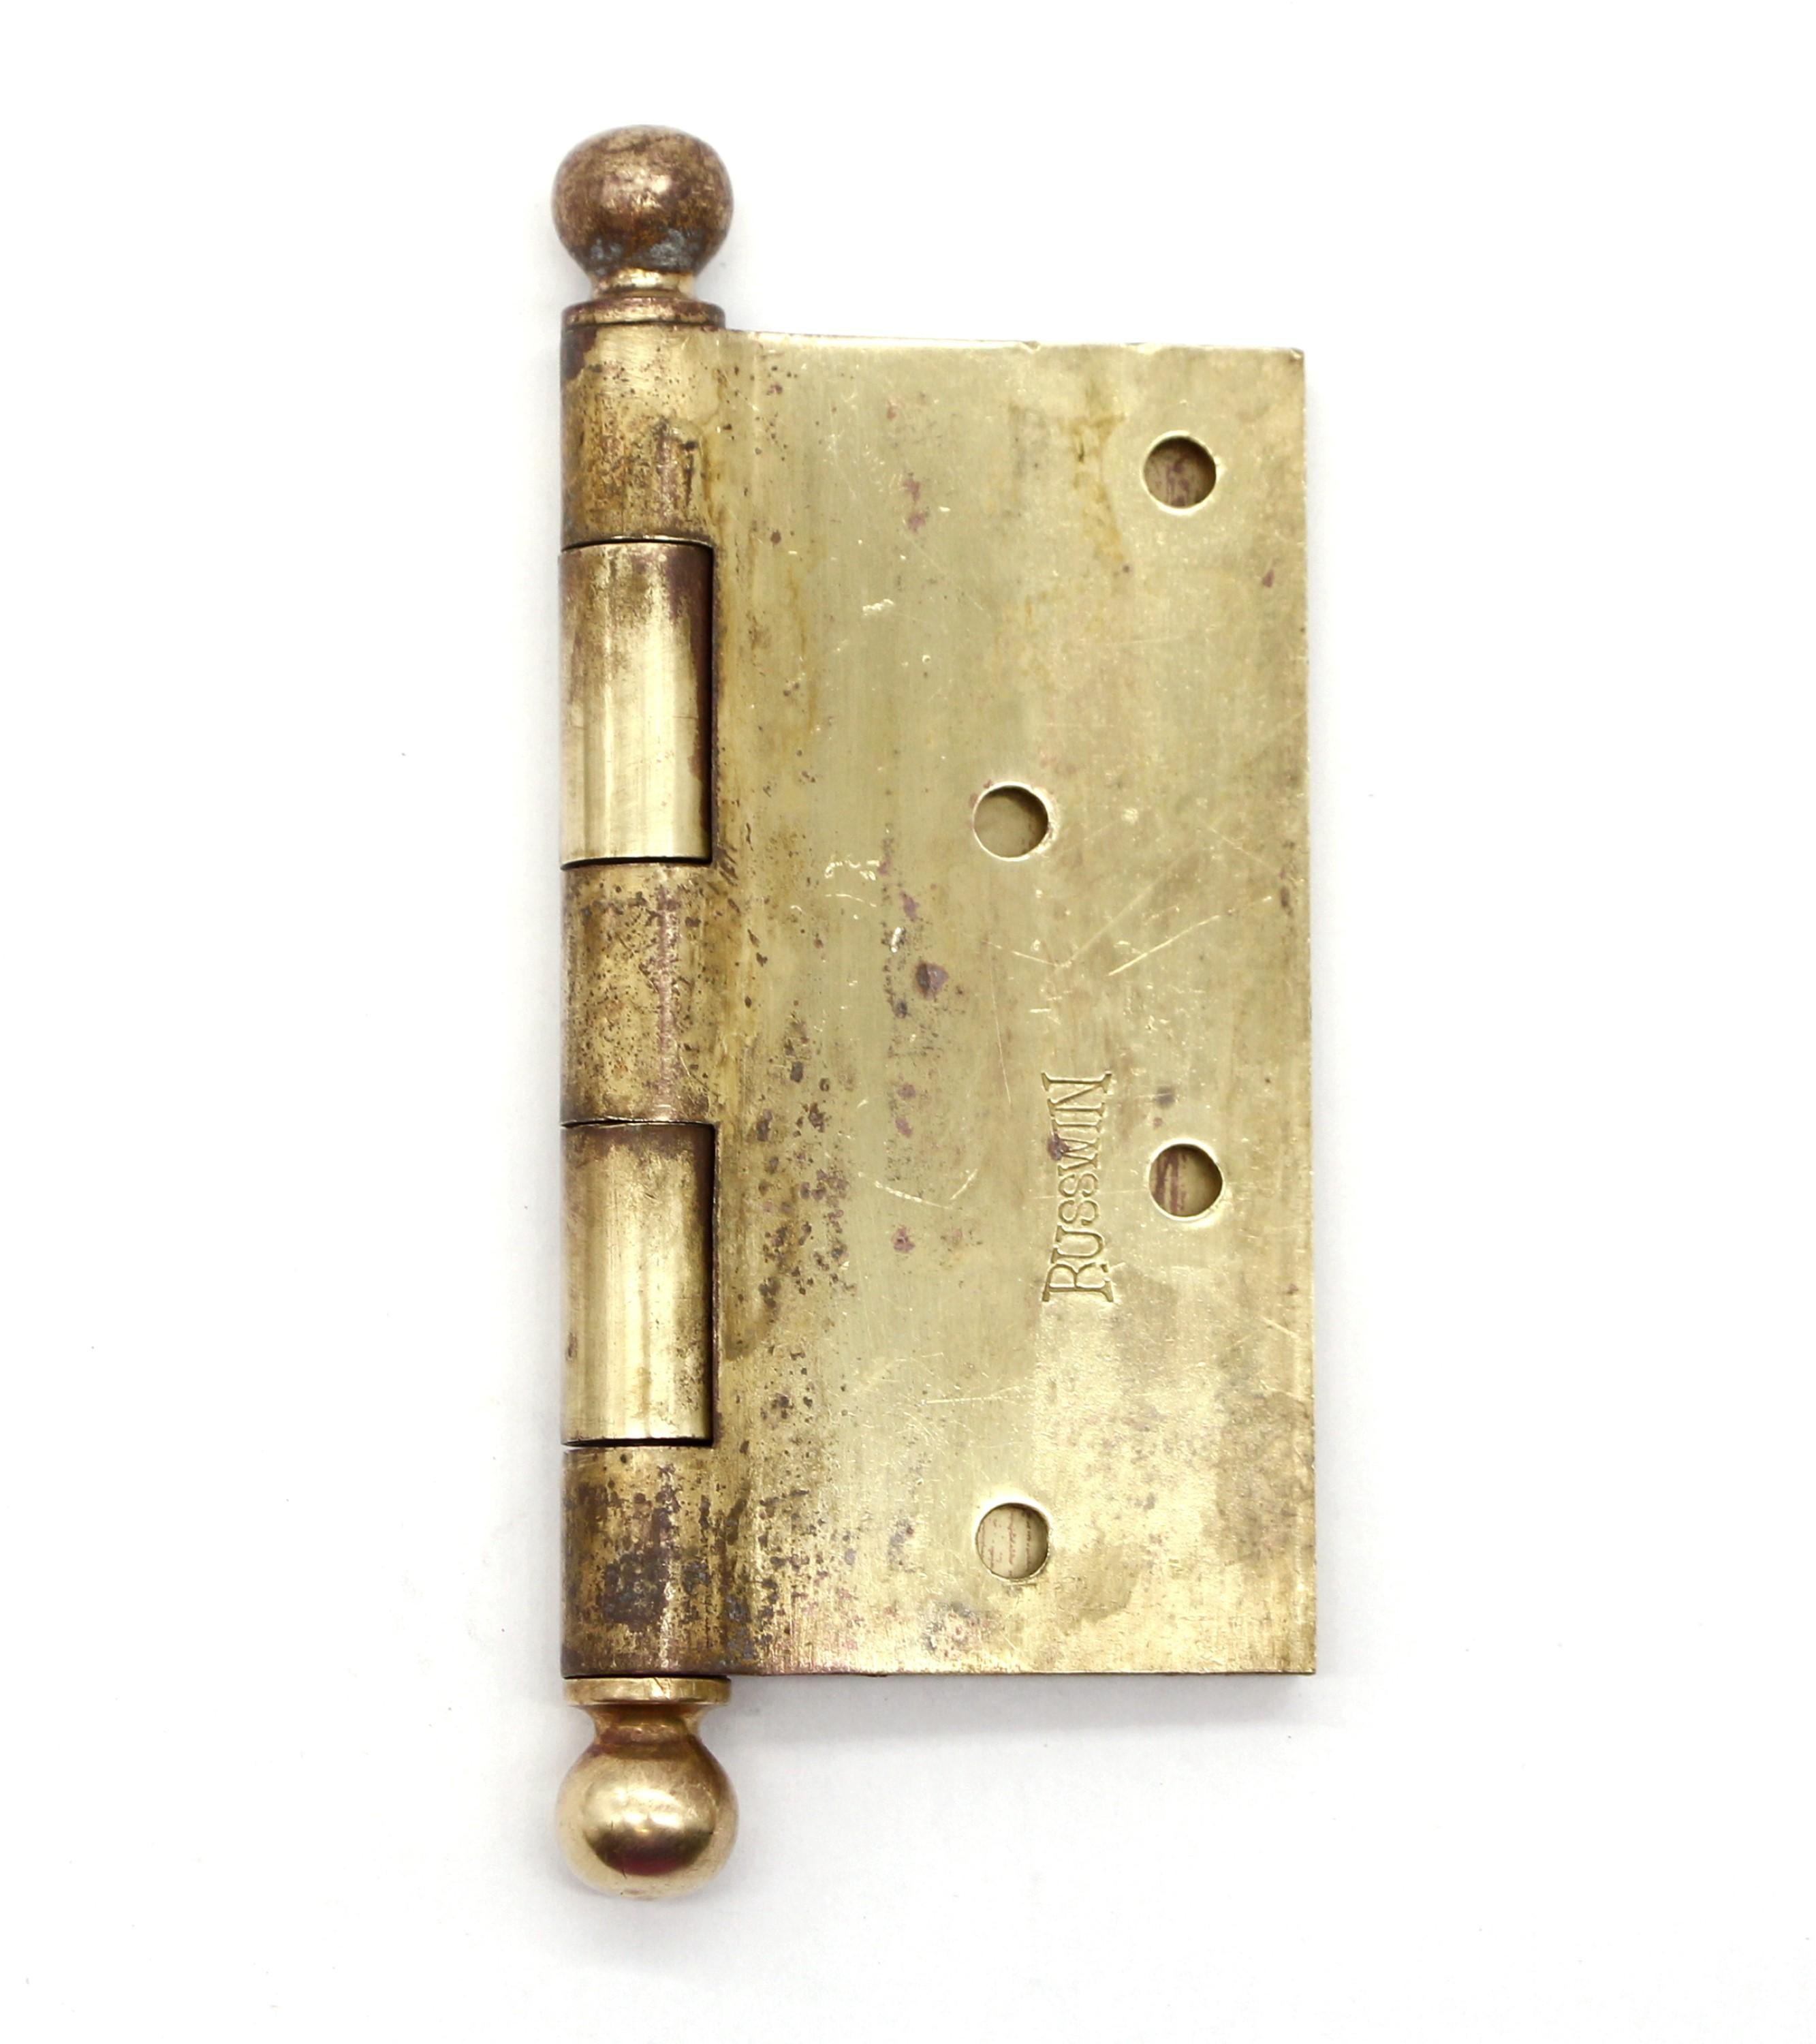 The vintage Russwin brass ball tip butt door hinge is commonly used in residential and commercial doors, providing smooth operation and a classic touch of elegance to any space. This is made of brass with ball tips, five knuckles, and a template